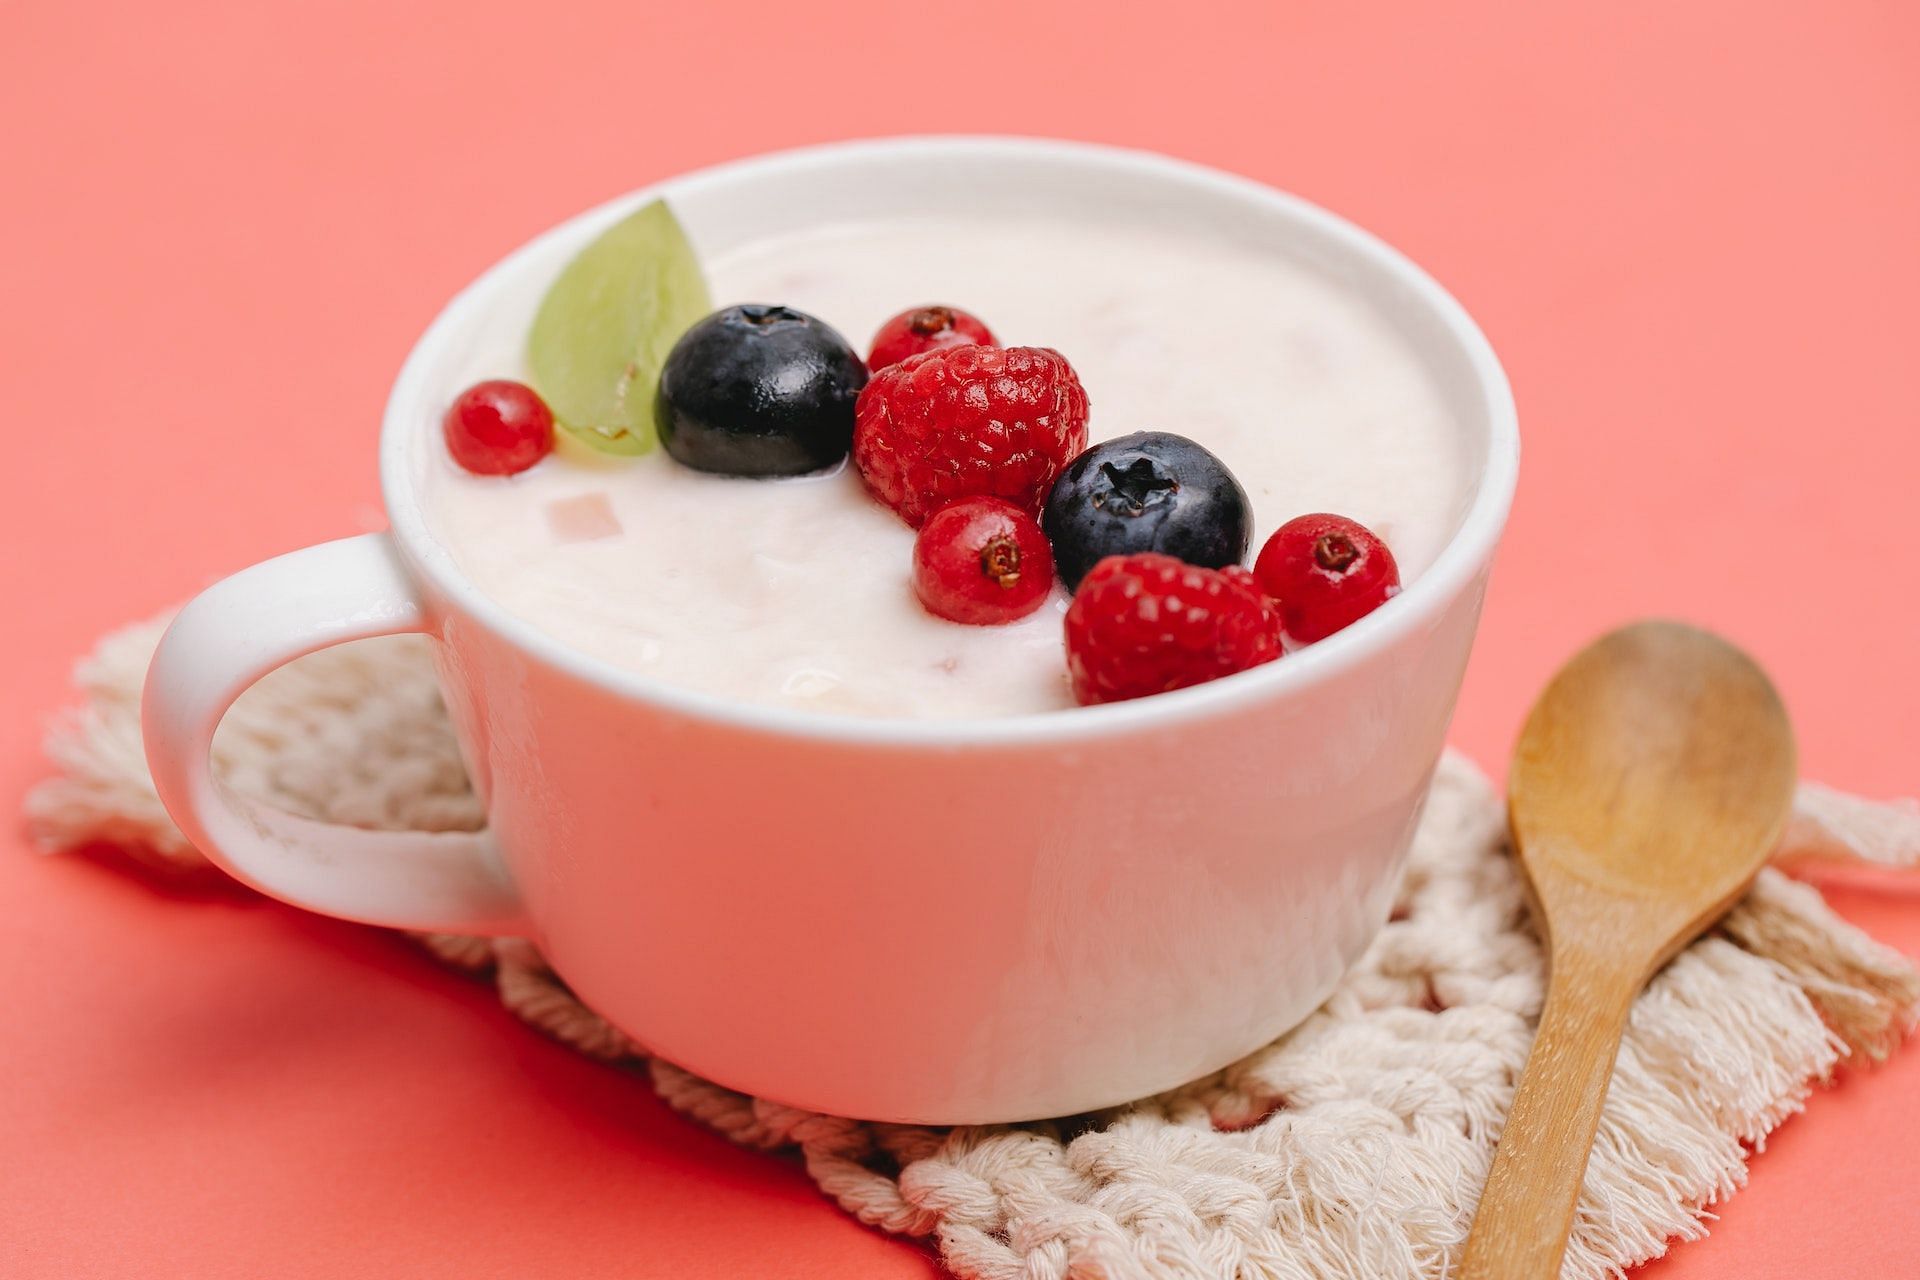 There are numerous health benefits of kefir. (Photo via Pexels/Any Lane)